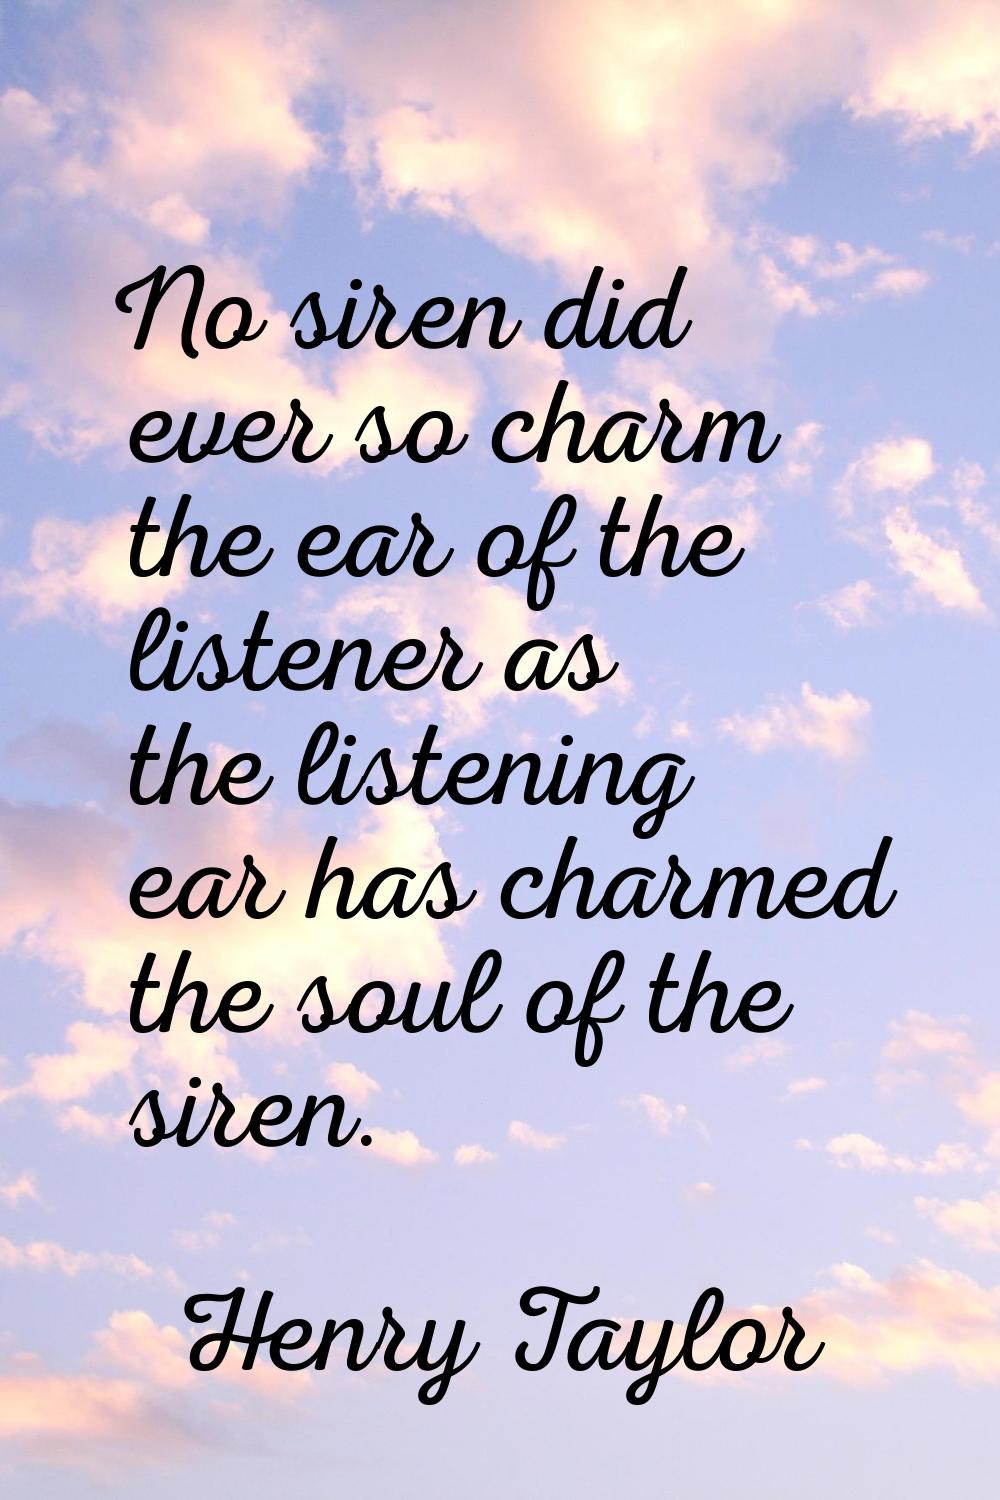 No siren did ever so charm the ear of the listener as the listening ear has charmed the soul of the